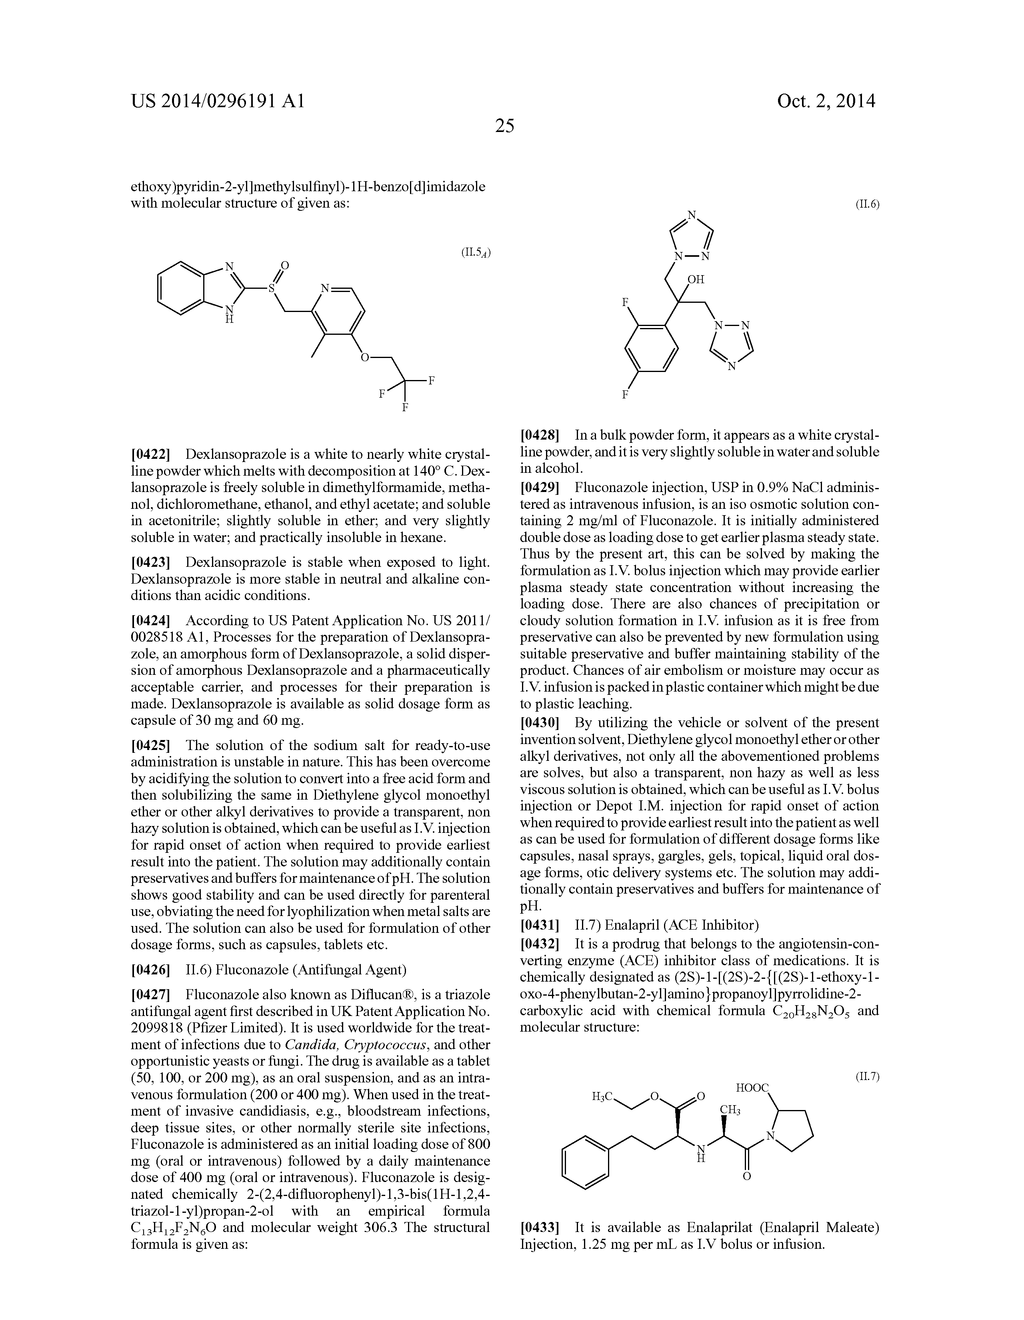 COMPOSITIONS OF PHARMACEUTICAL ACTIVES CONTAINING DIETHYLENE GLYCOL     MONOETHYL ETHER OR OTHER ALKYL DERIVATIVES - diagram, schematic, and image 27